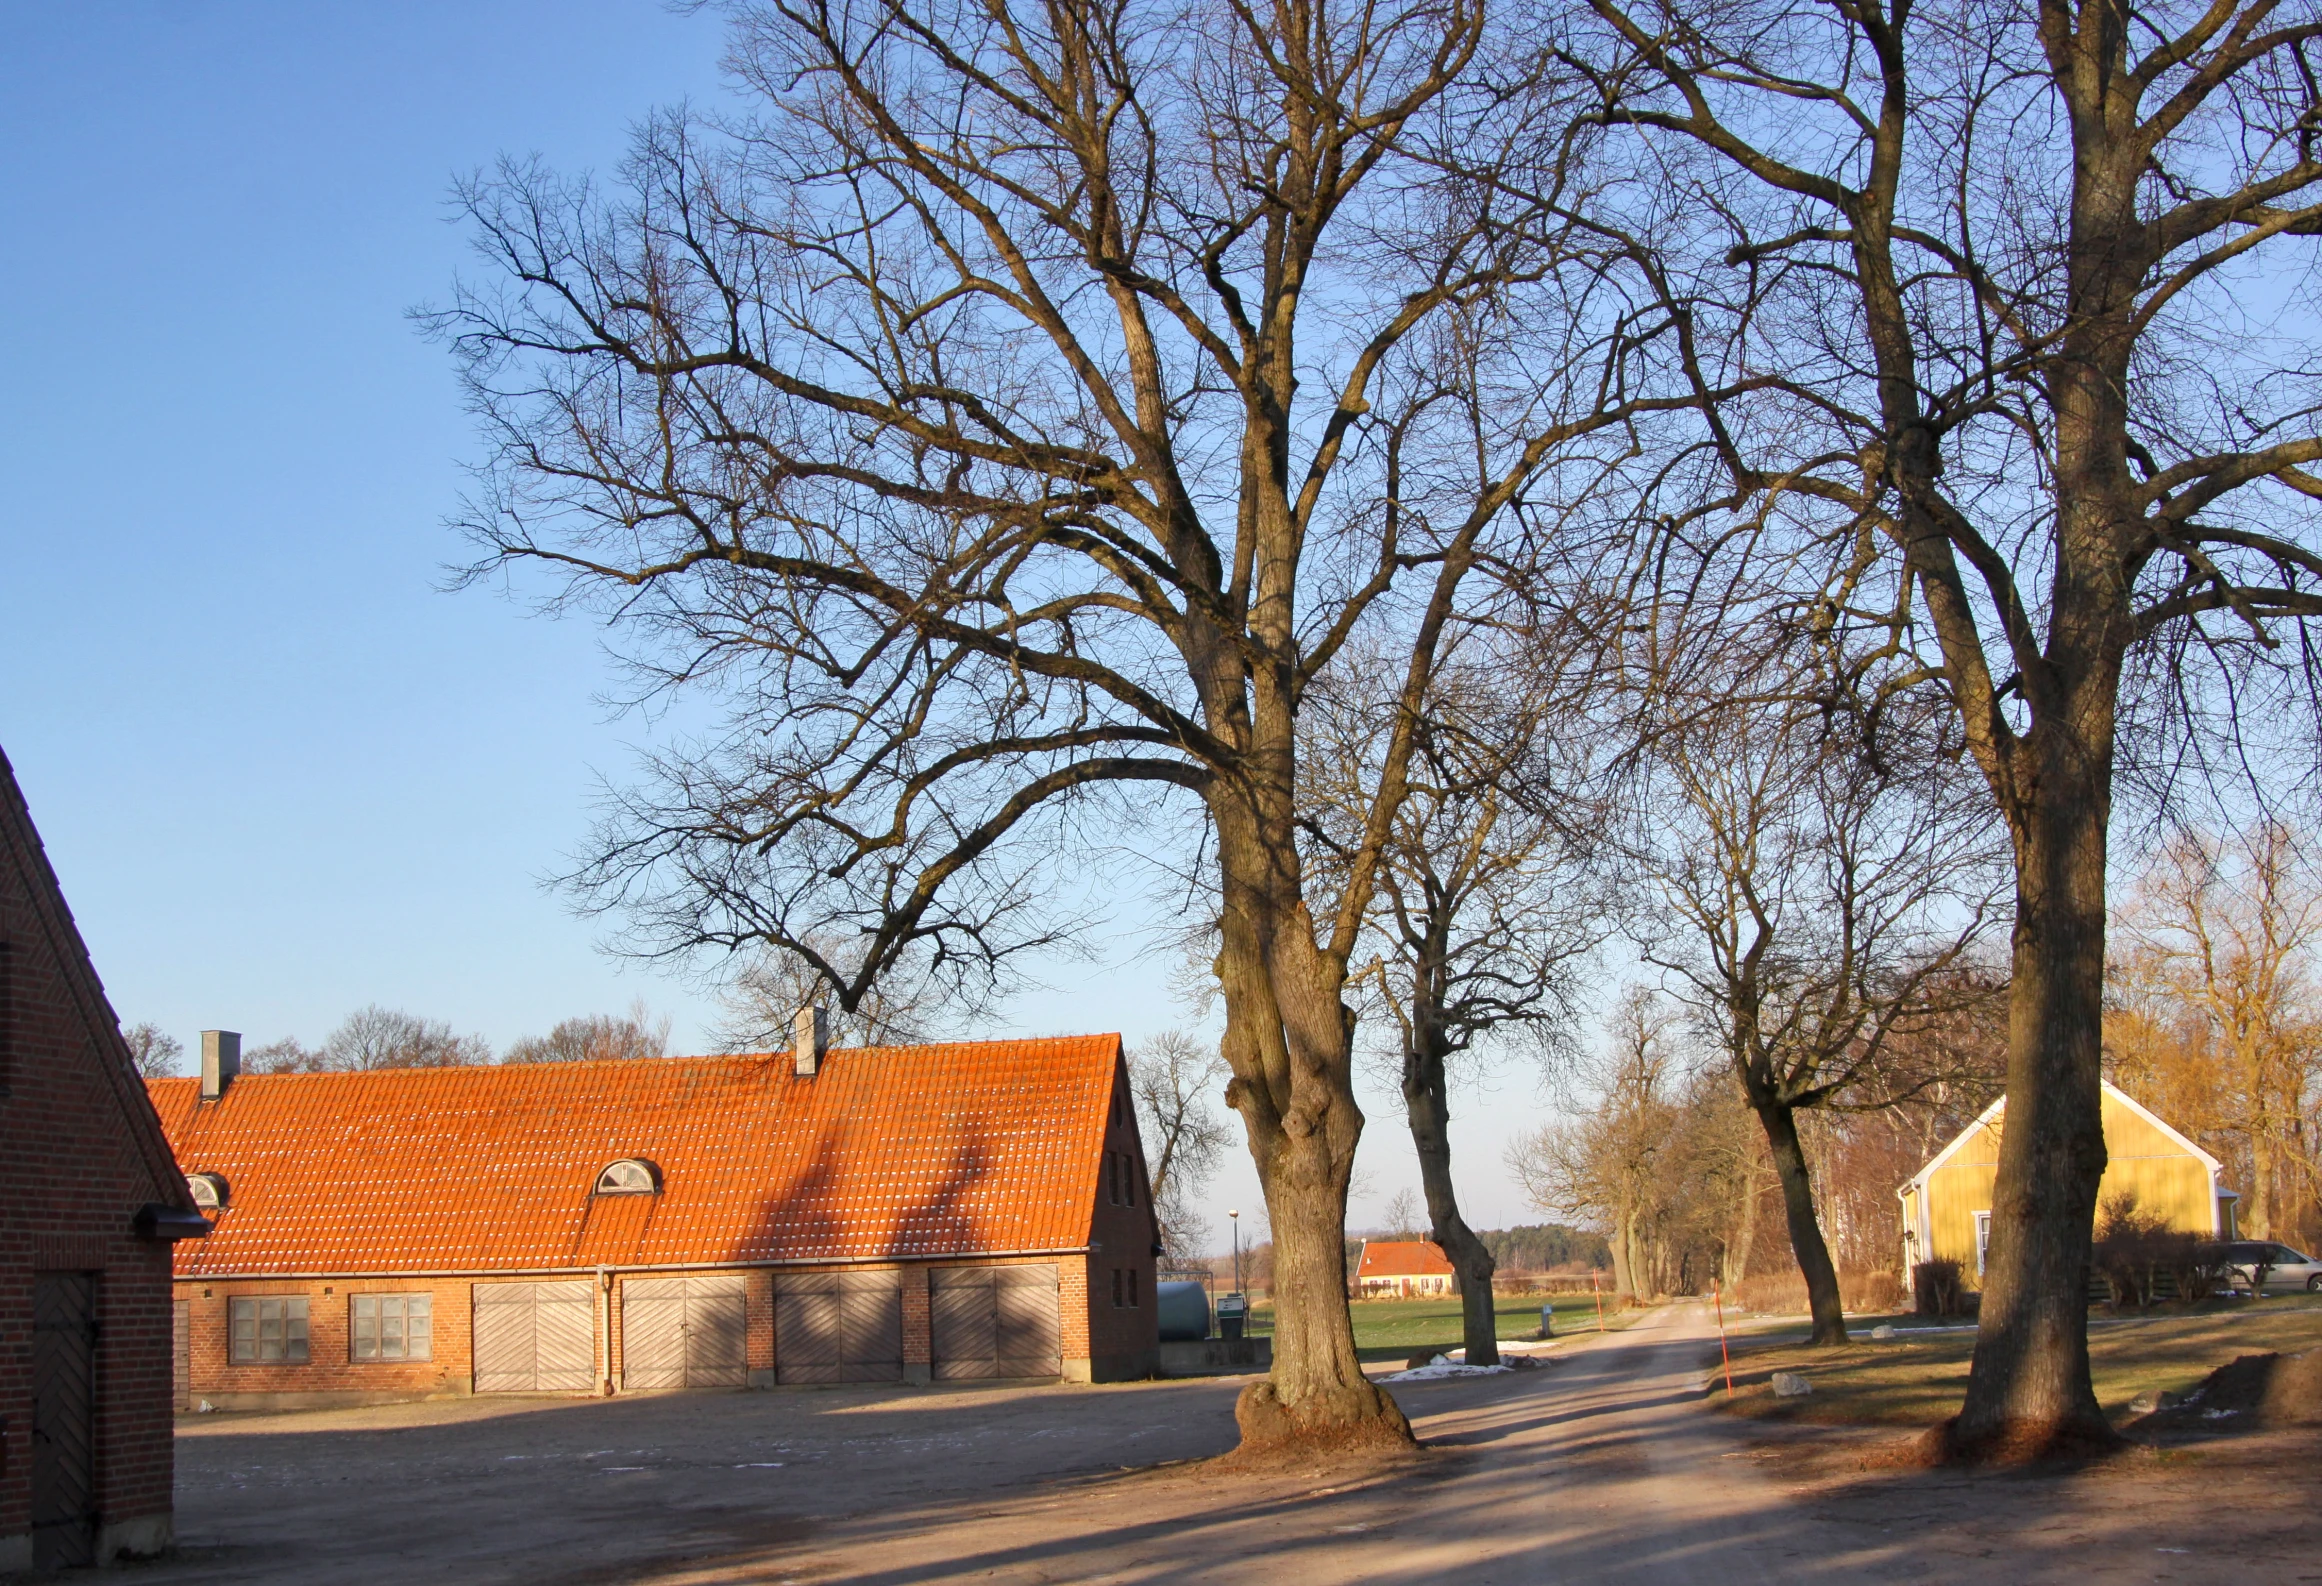 two large trees and some houses in the background